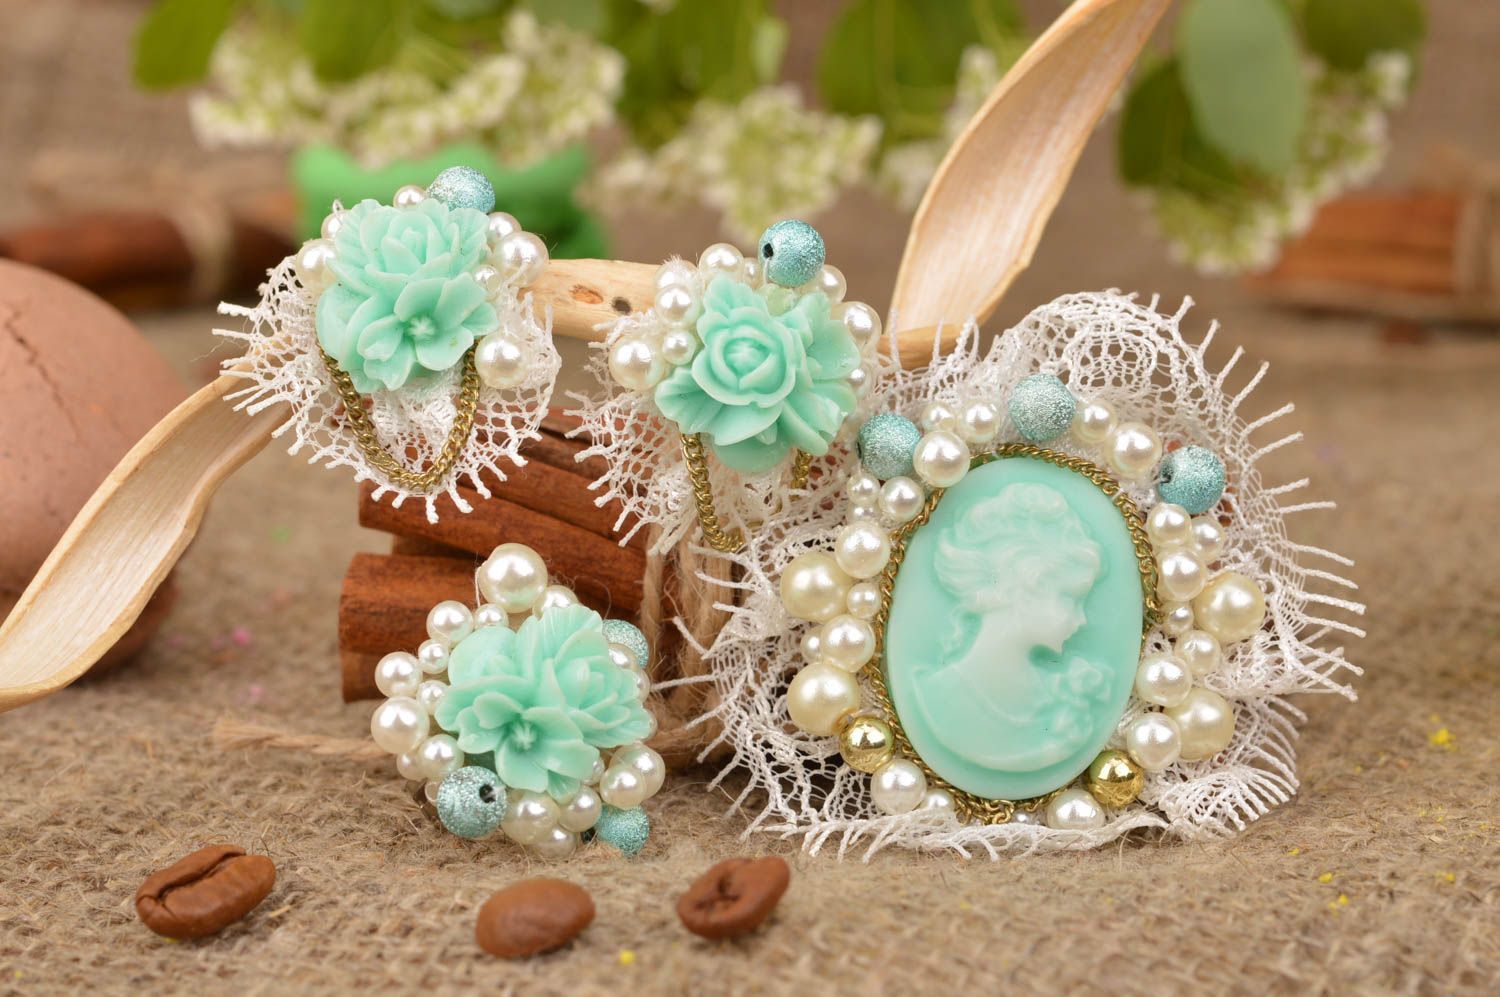 Handmade set of jewelry ring brooch and earrings made of lace and beads photo 1